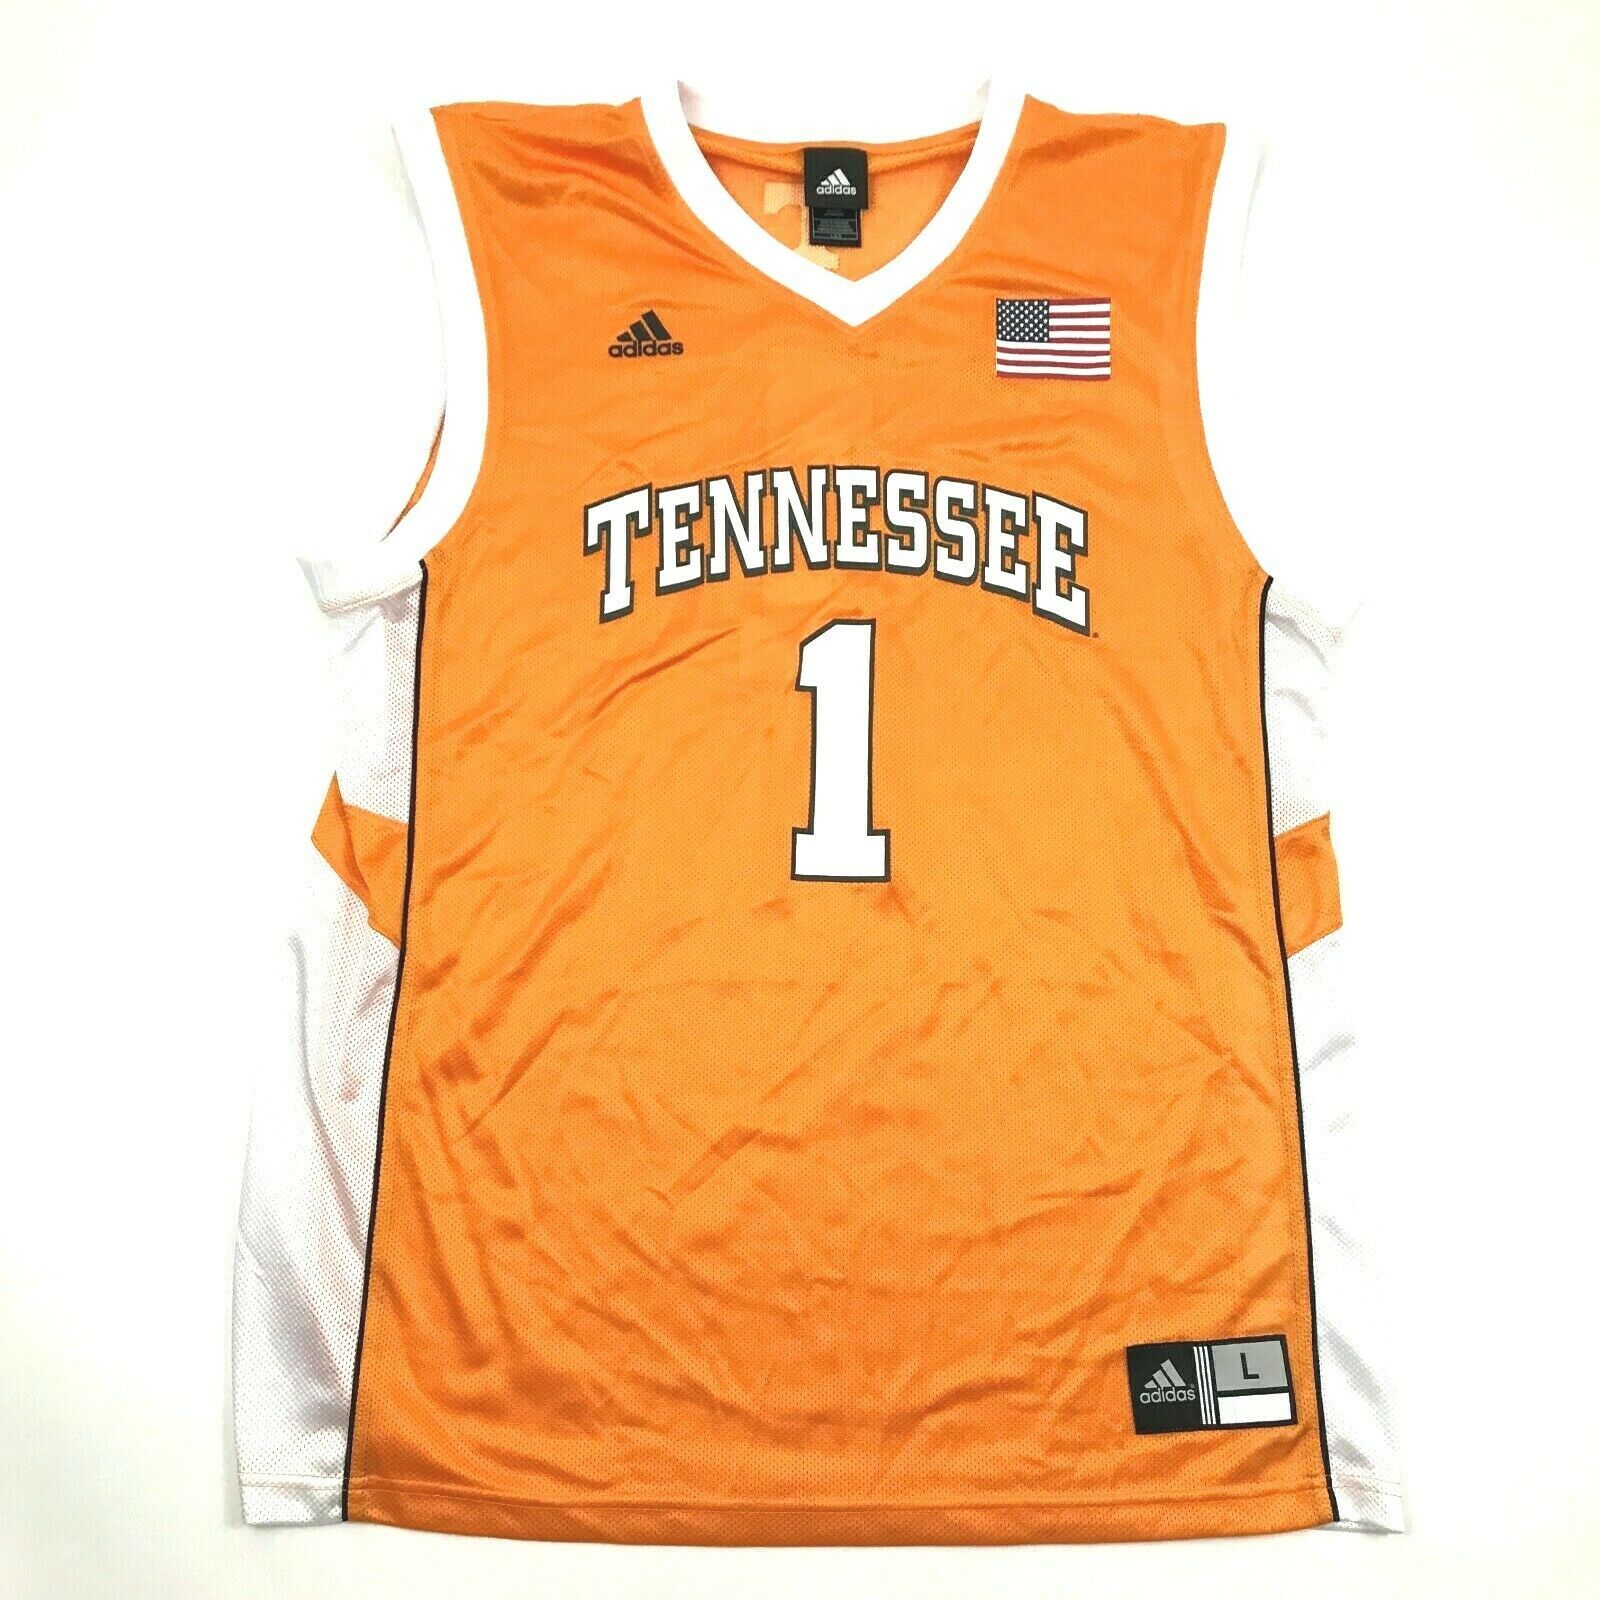 NEW Adidas TENNESSEE Basketball Jersey Mens Size L Adult Orange ...